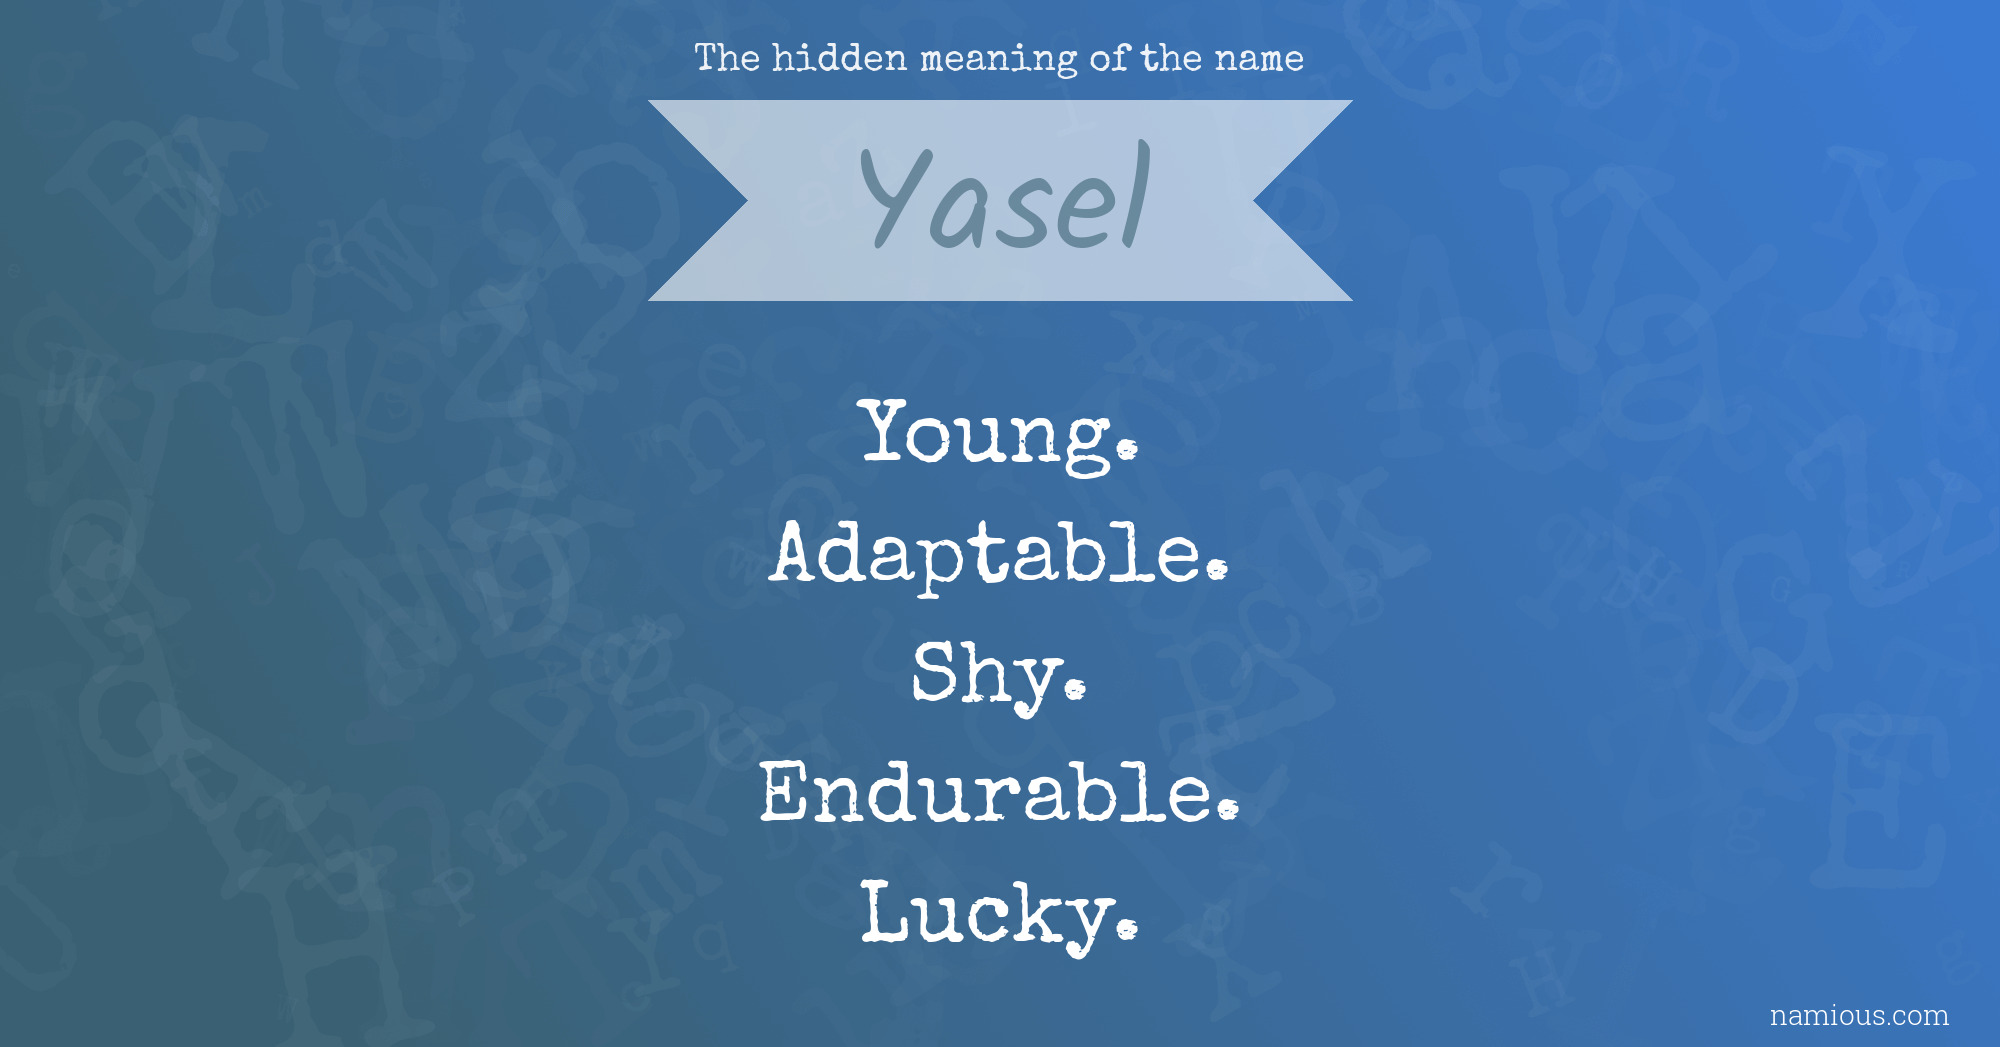 The hidden meaning of the name Yasel